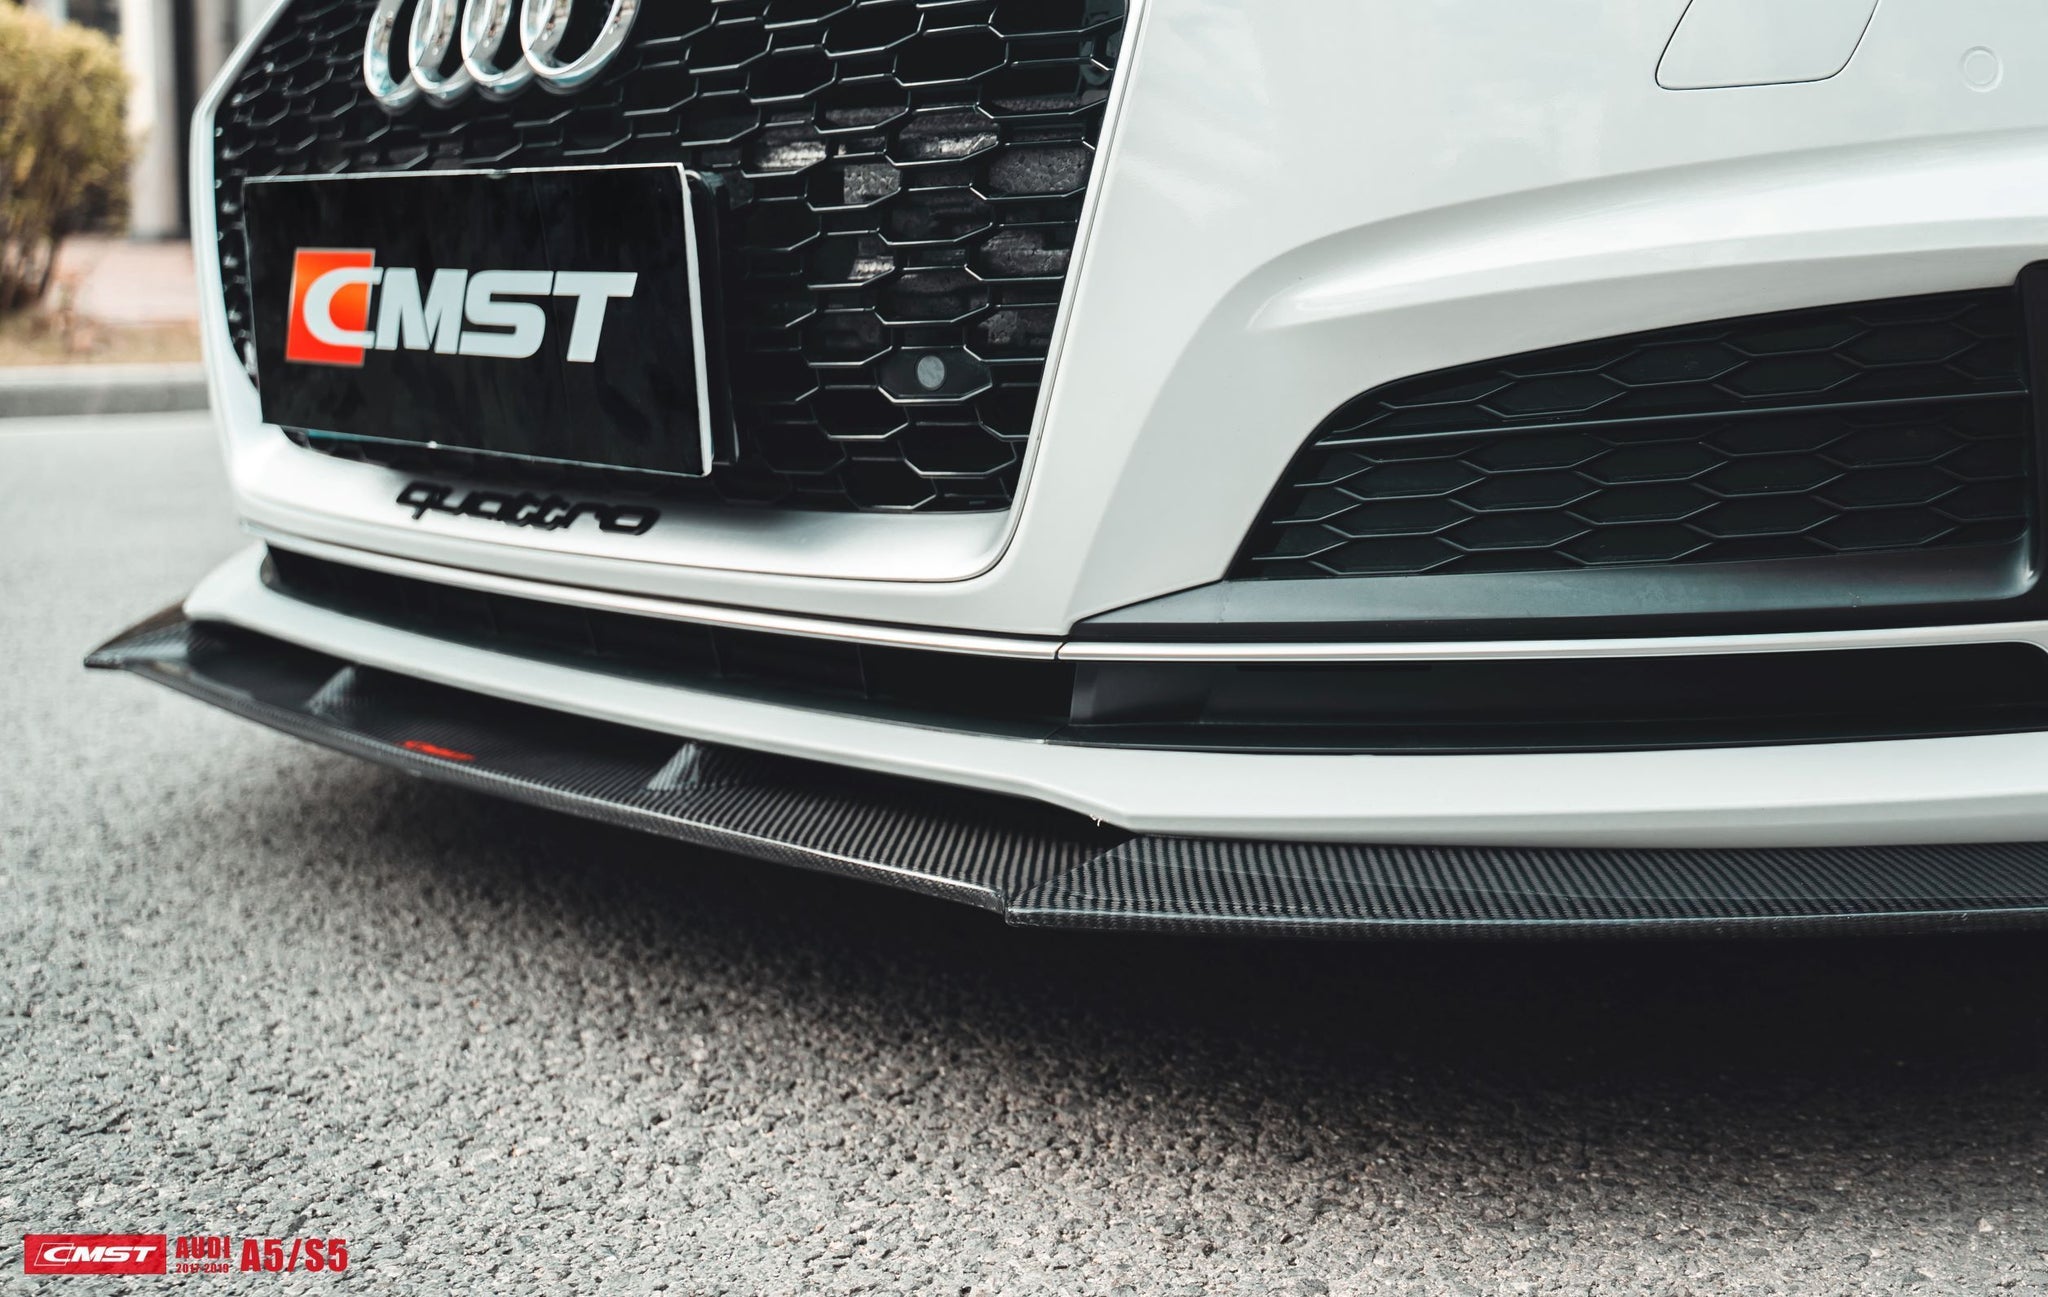 Check our price and buy CMST Carbon Fiber Body Kit set for Audi A5 / S5 B9!